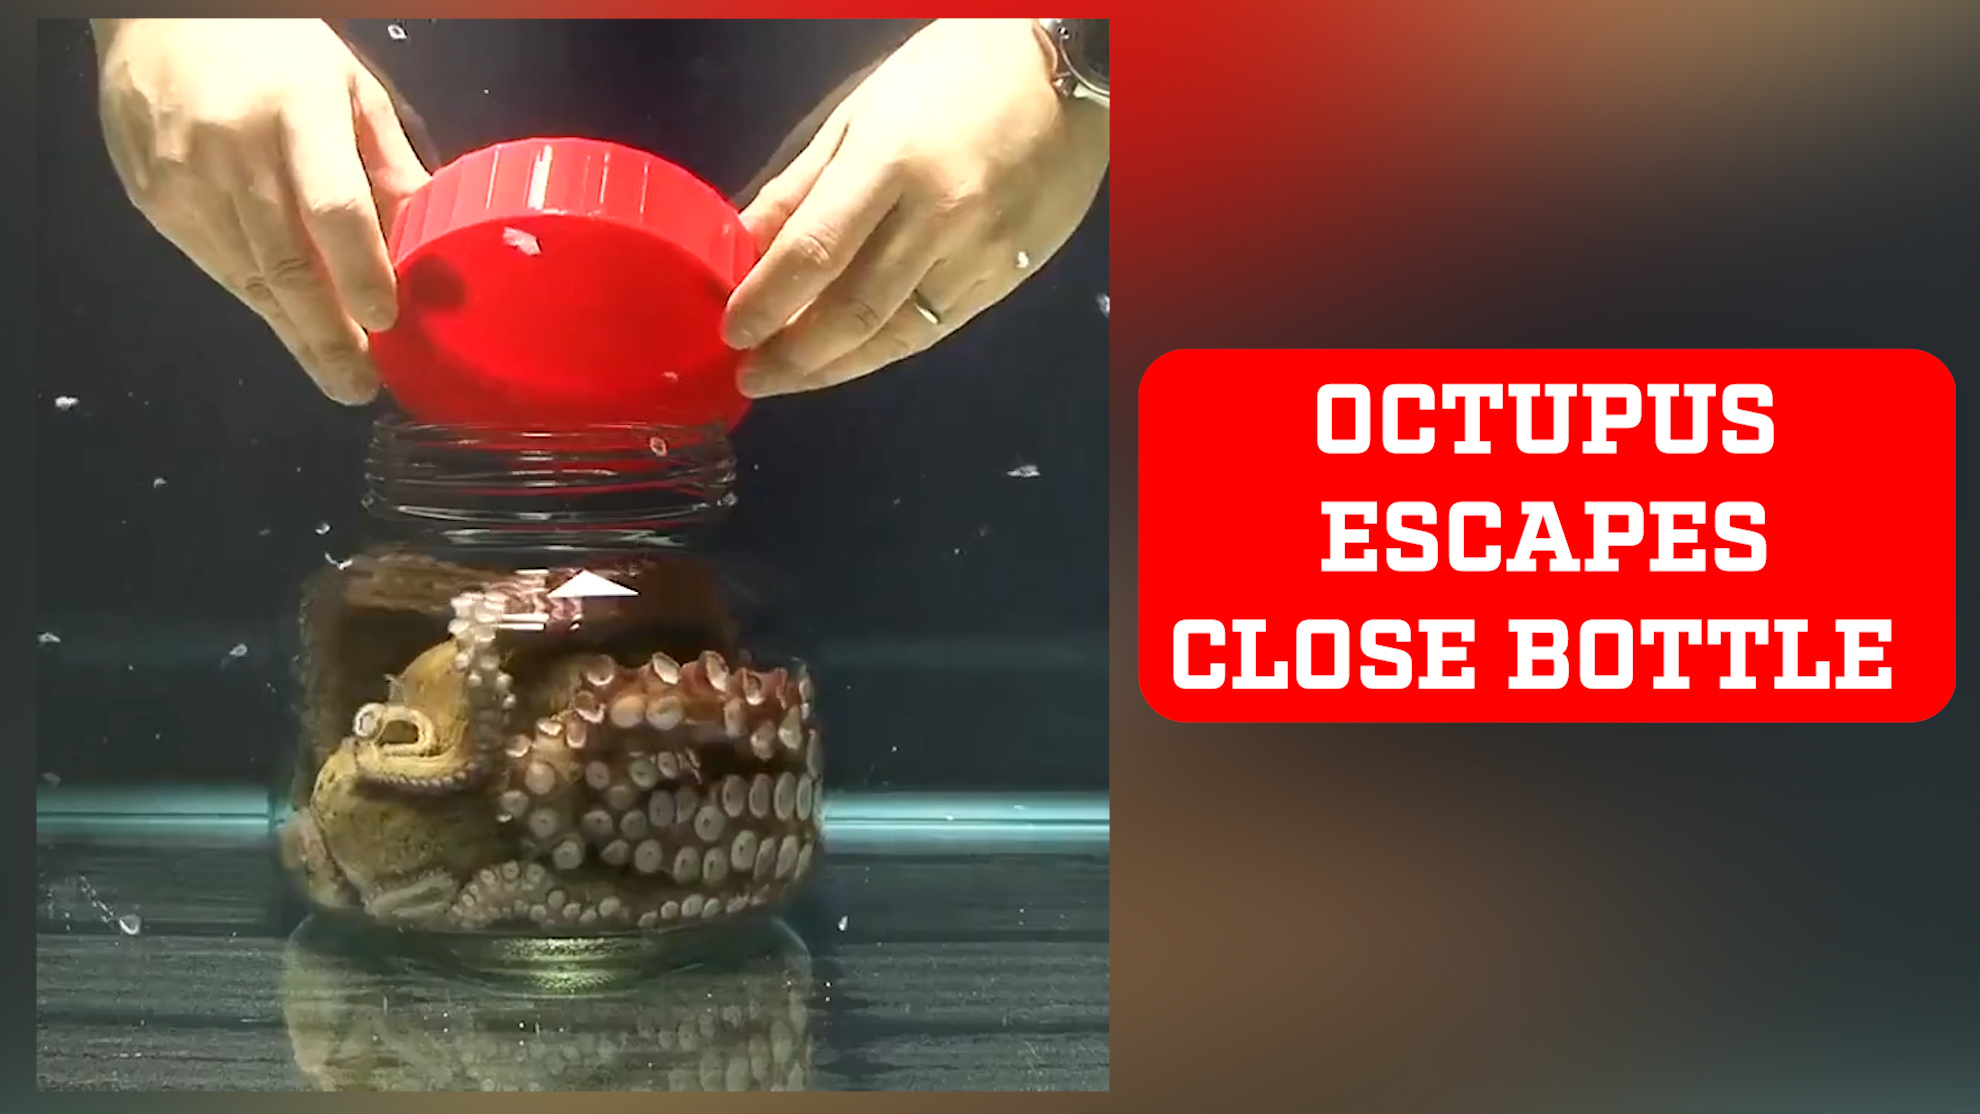 Houdini! Octopus escapes from closed bottle